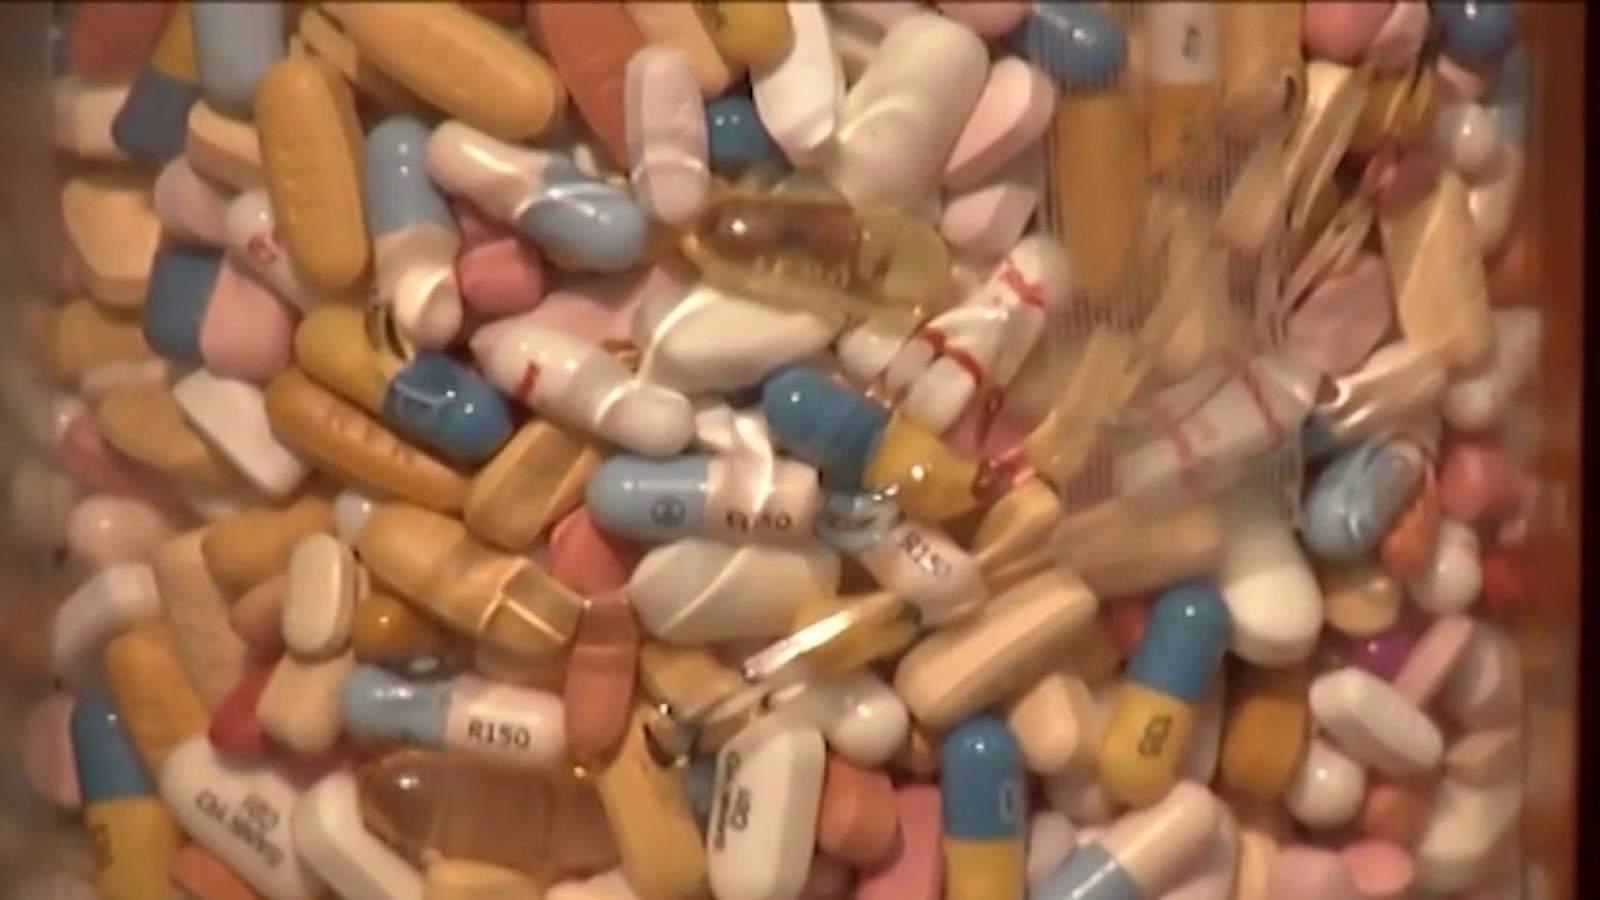 Some prescriptions could put you at risk for dementia